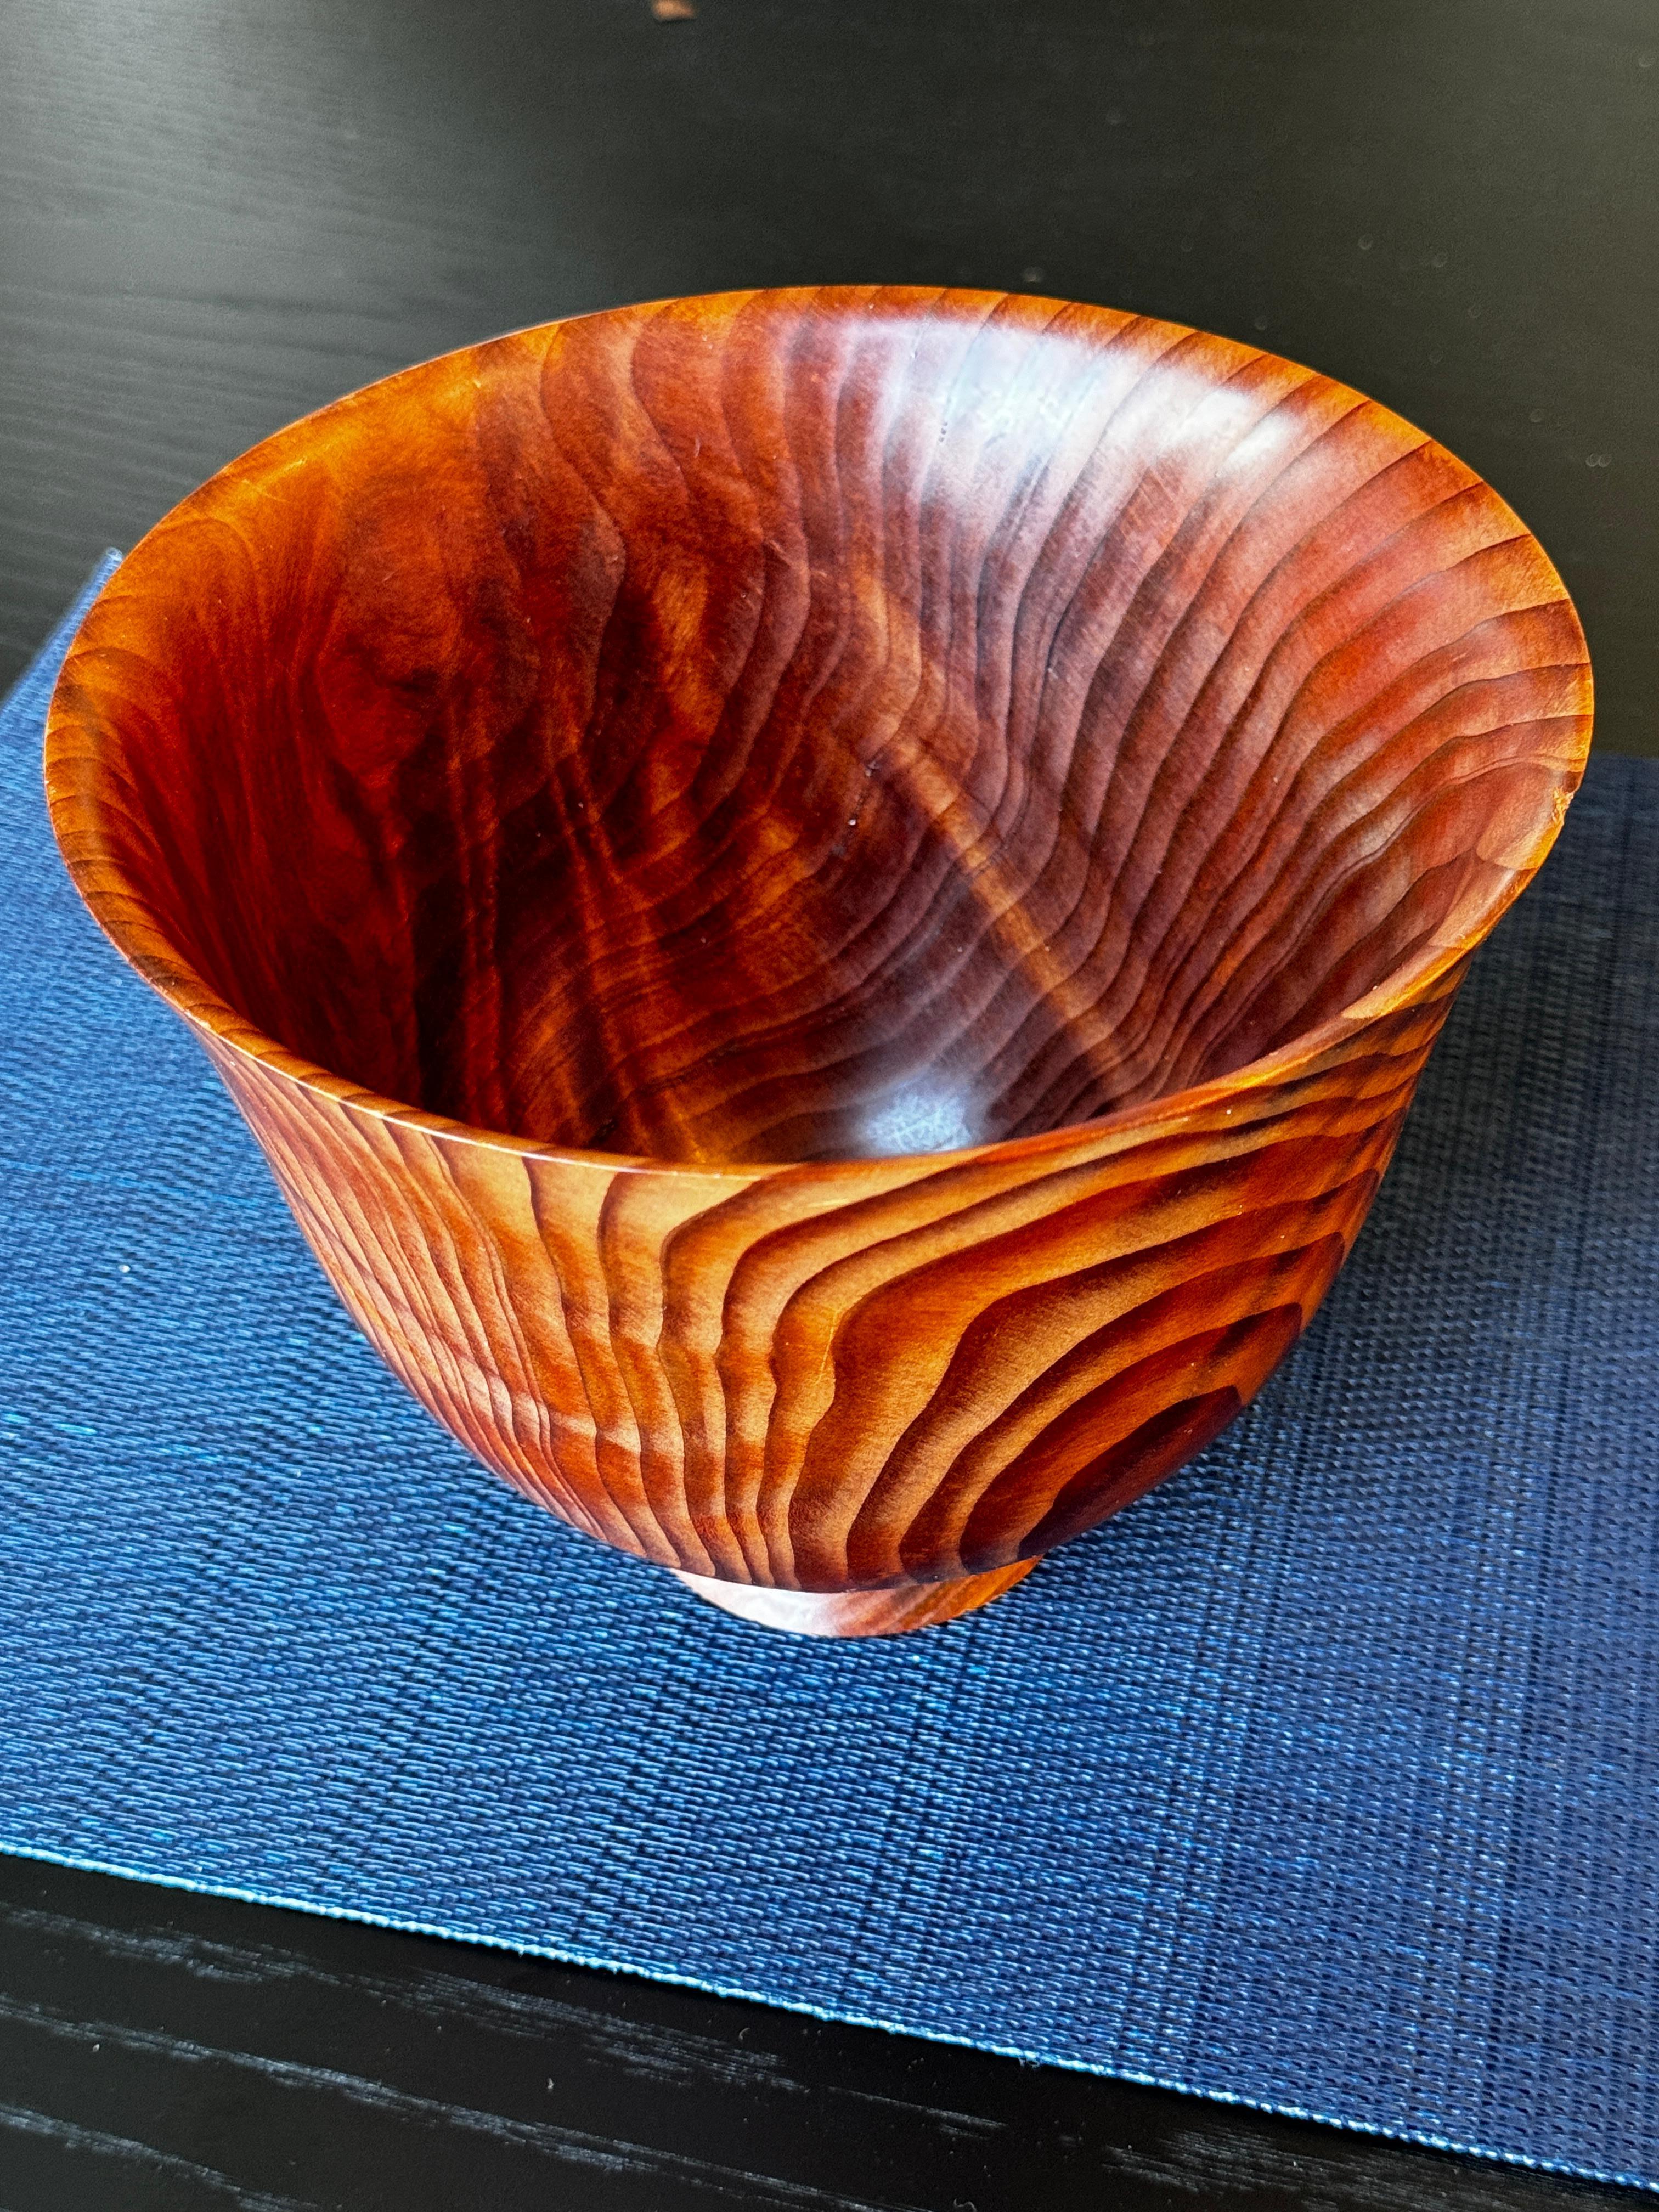 Two Hand-Turned Wood Bowls, One Redwood: Signed, One Segmented

Redwood: signed Jerry Kermak 7.5